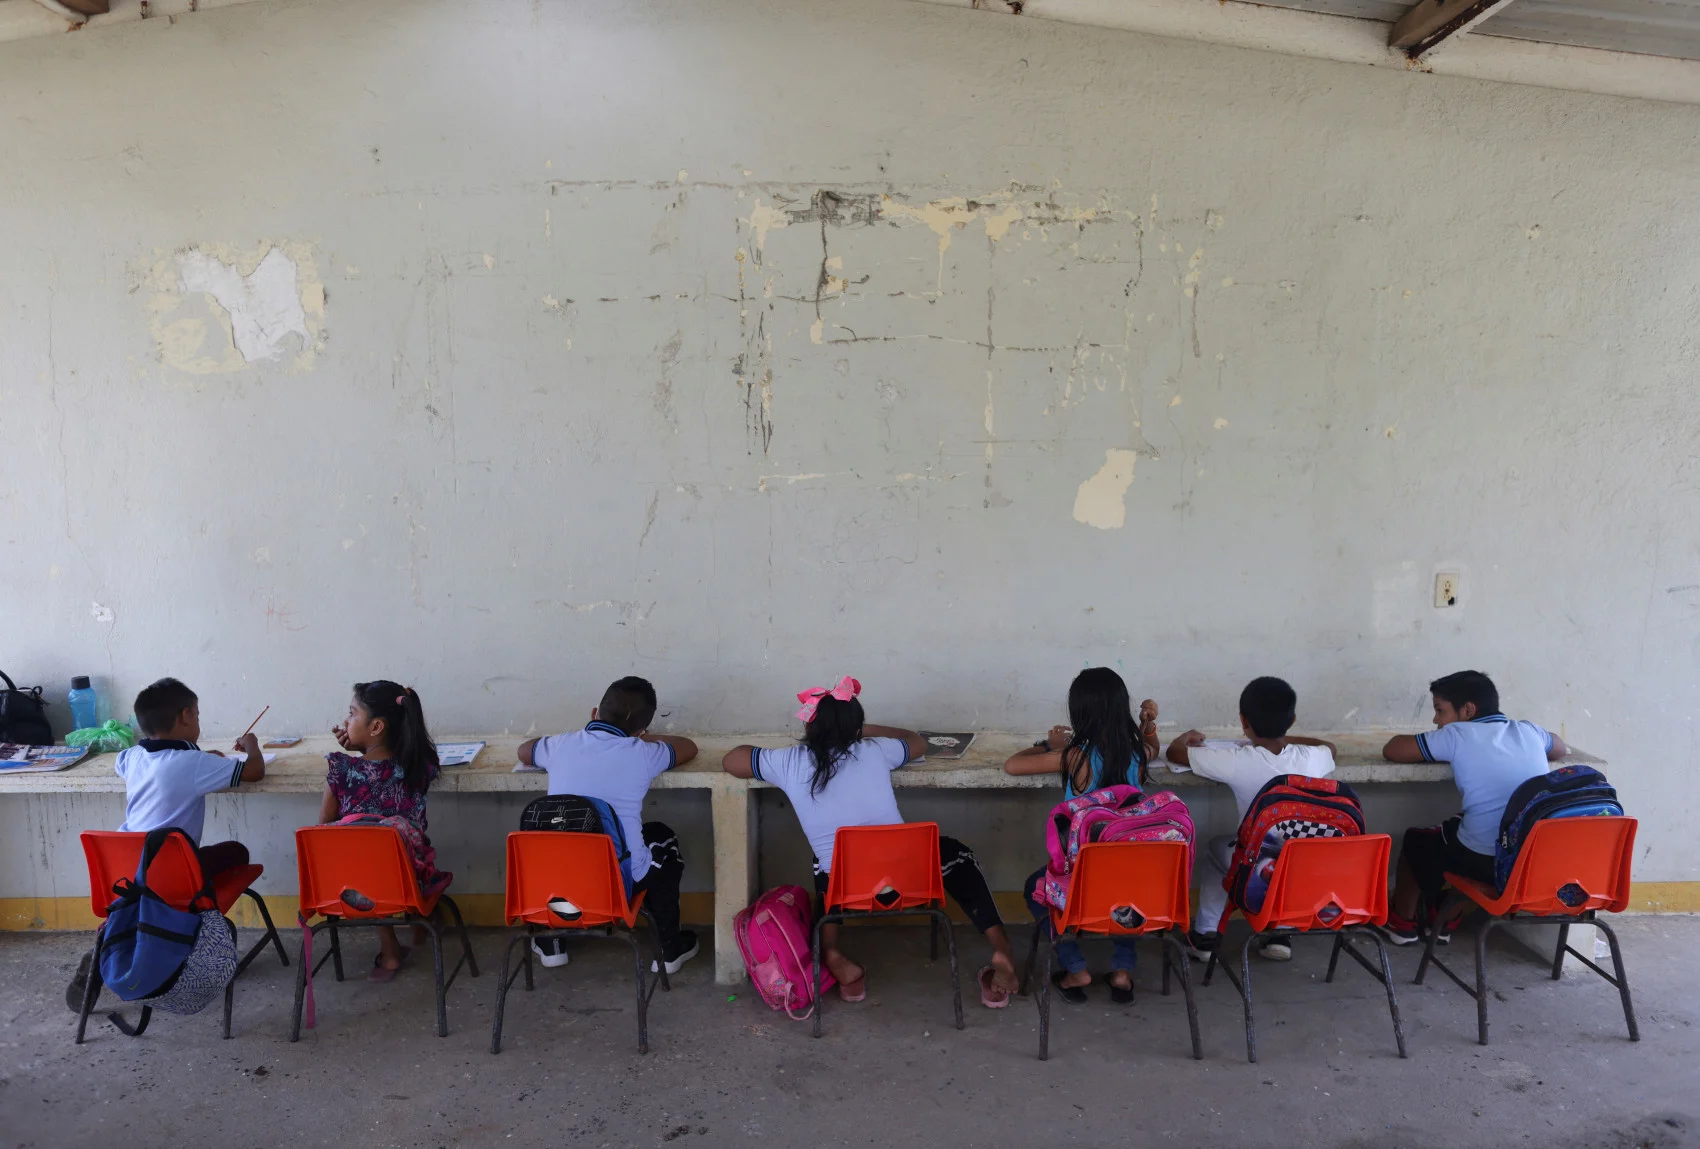 Children attend school outside the school building as their classrooms have been affected by rising sea levels, in El Bosque, Mexico November 7, 2022. (REUTERS/Gustavo Graf)